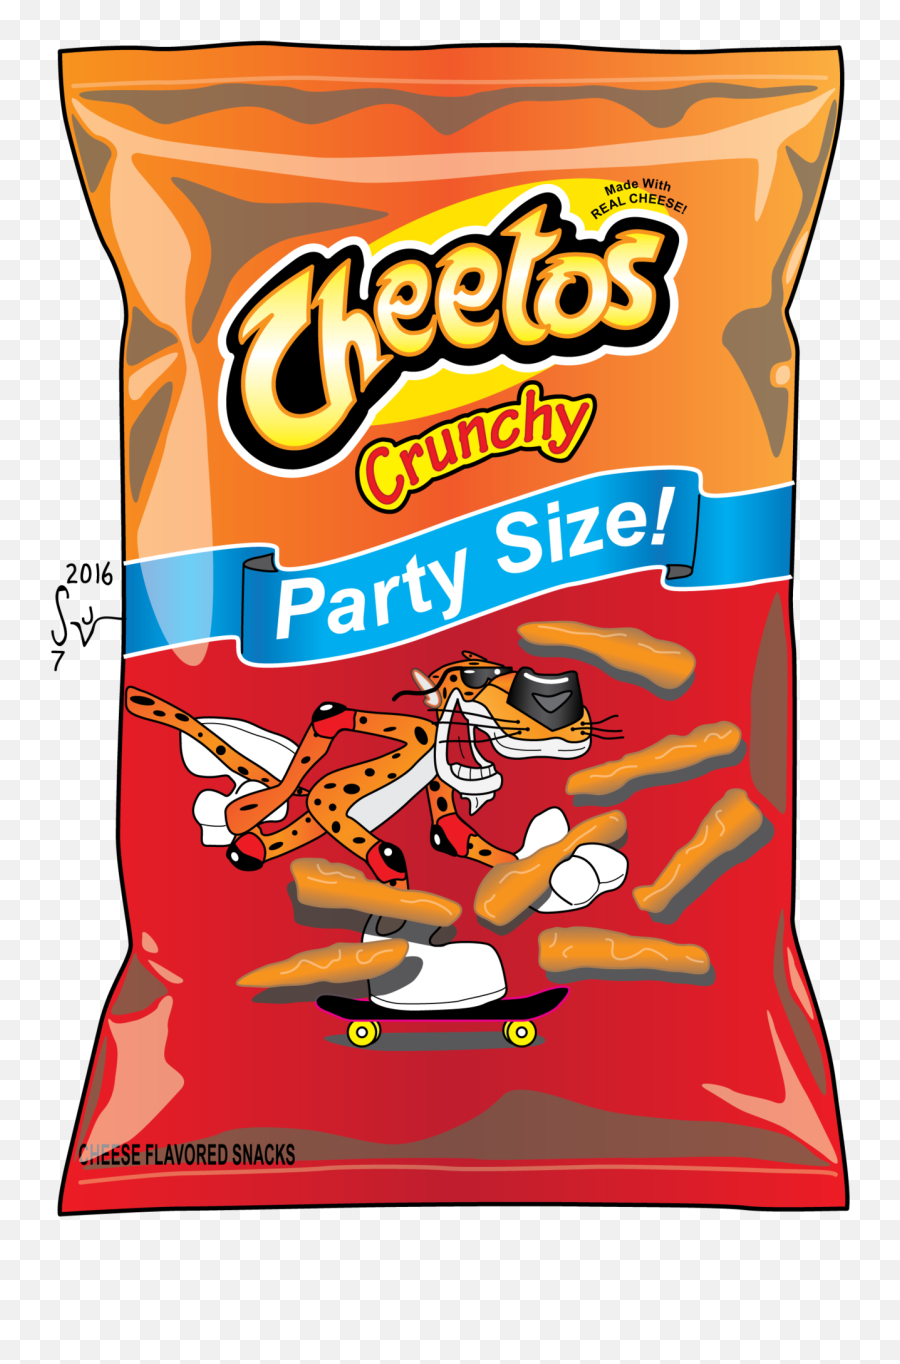 Download Cheetos Sweetos - Cheetos Crunchy Png Image With No Cheetos Party Size,Cheeto Transparent